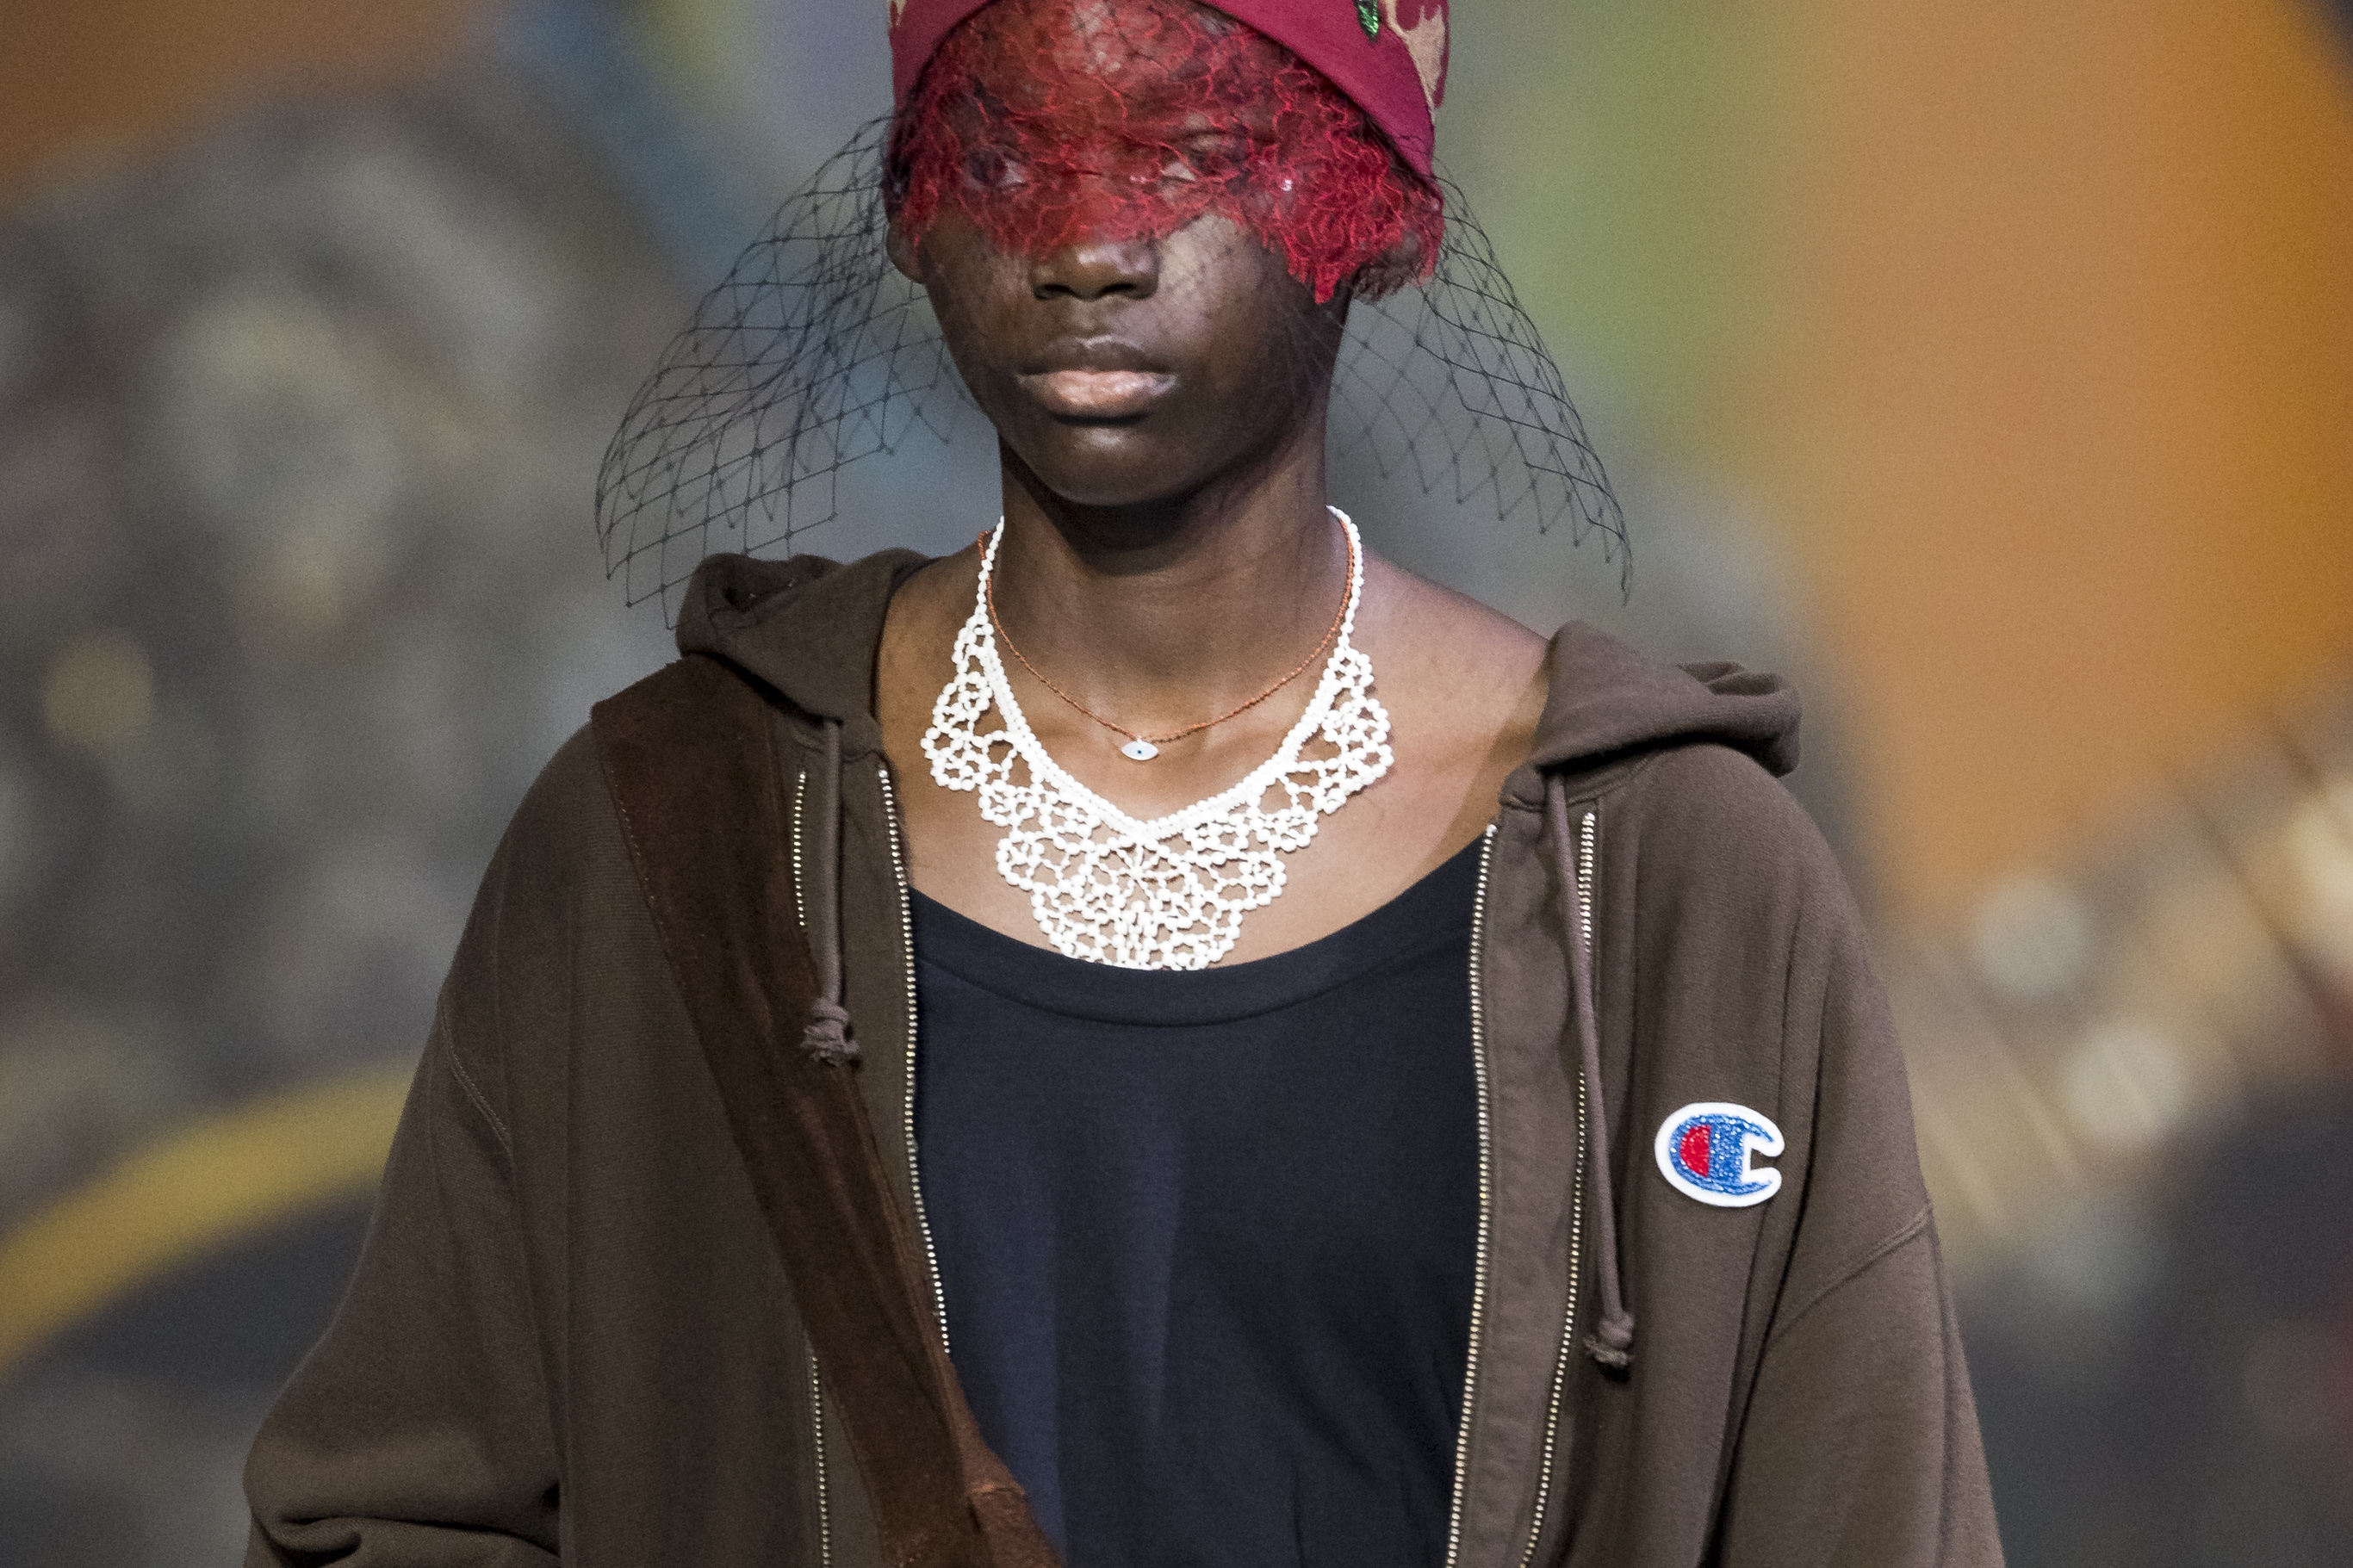 Champion x Undercover runway imagery